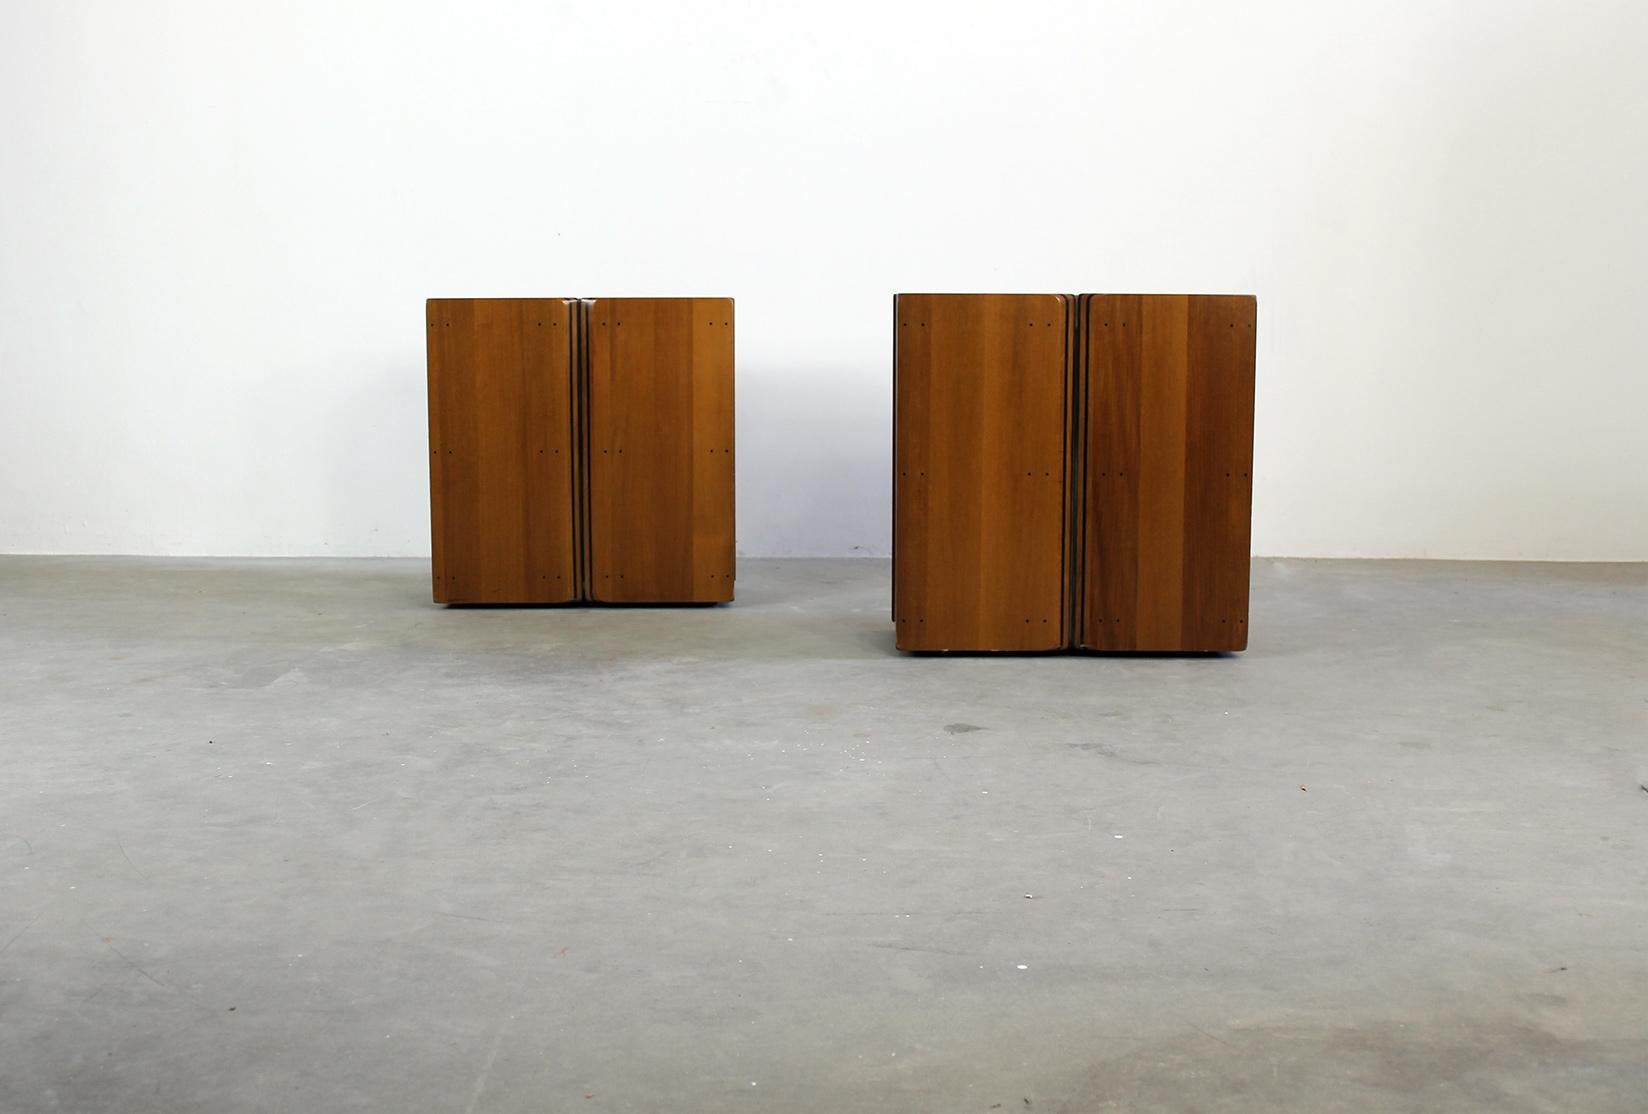 A couple of Artona nightstands in walnut wood and metal details. 
Designed by Tobia and Afra Scarpa and produced by Maxalto in 1970s. 

The night stands reflect on the wood structure the peculiar decorative motif of the Artona serie by Maxalto ,the